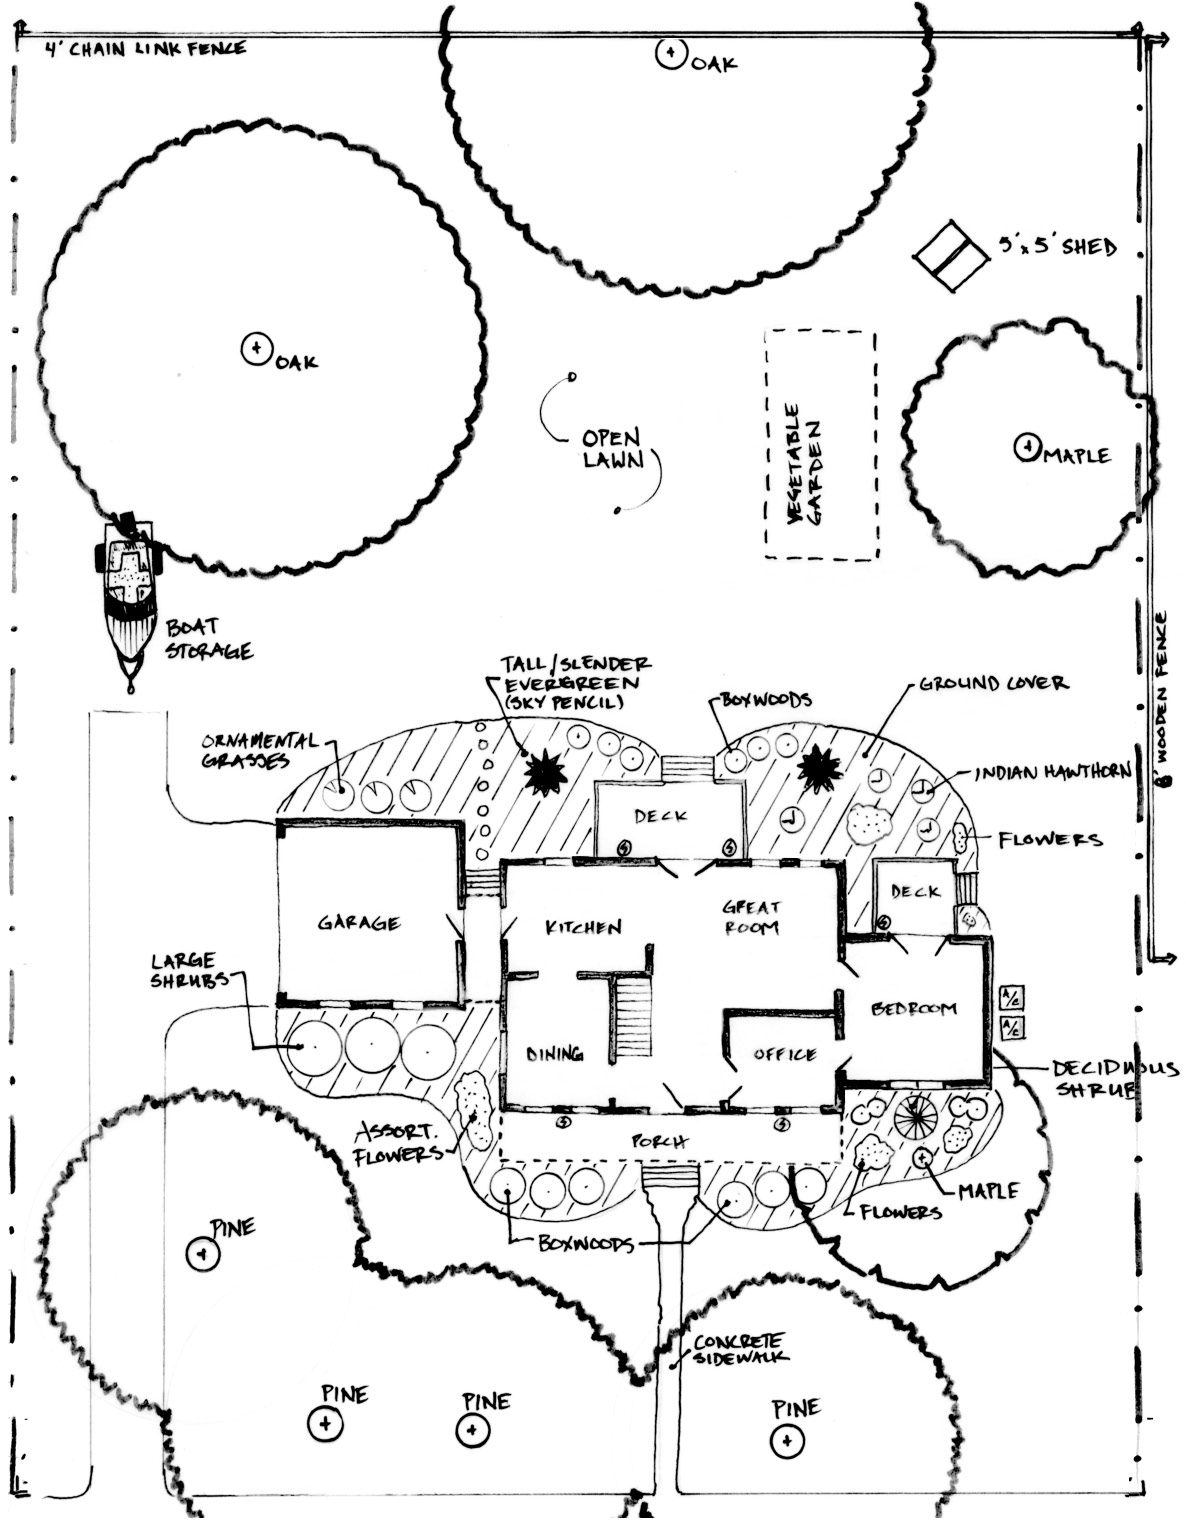 Drawing of a house base plan with different trees, shrubs, and other plantings surrounding the house and lawn areas.